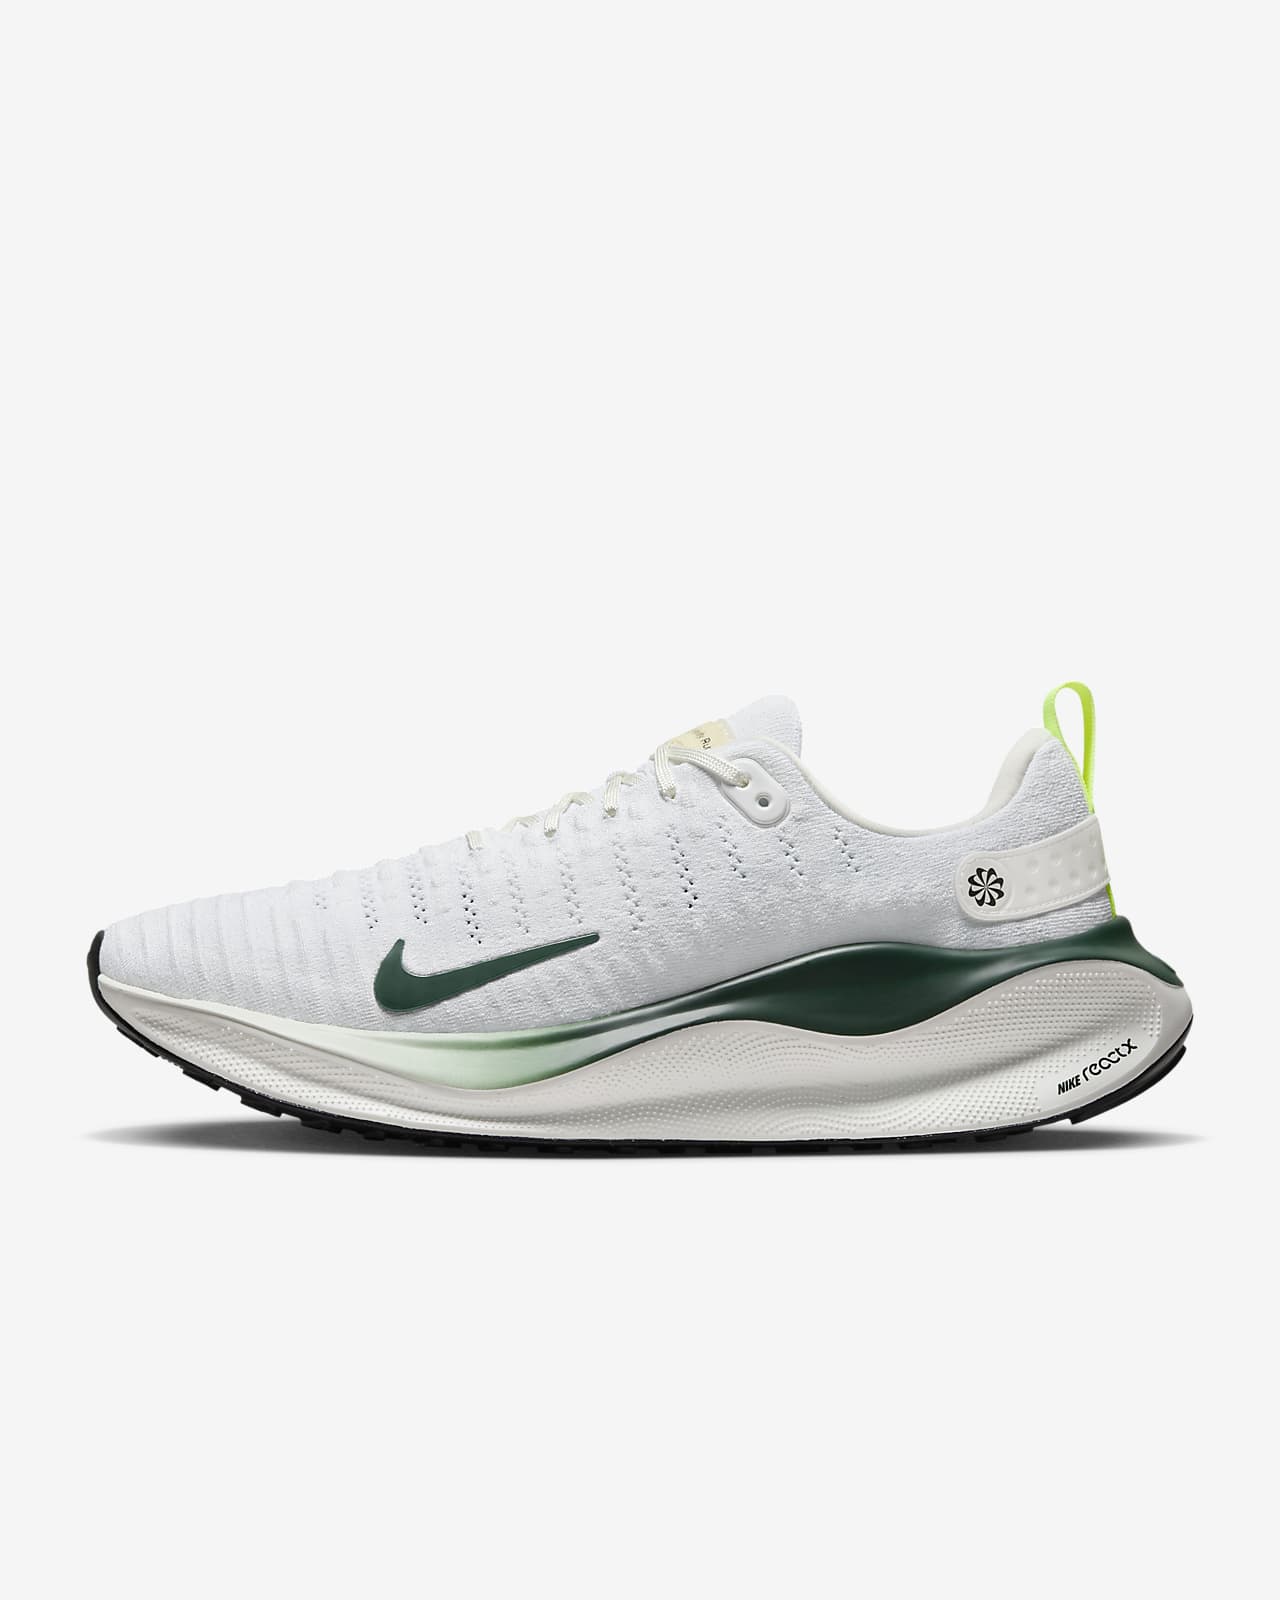 Chaussure de running sur route Nike InfinityRN 4 pour homme